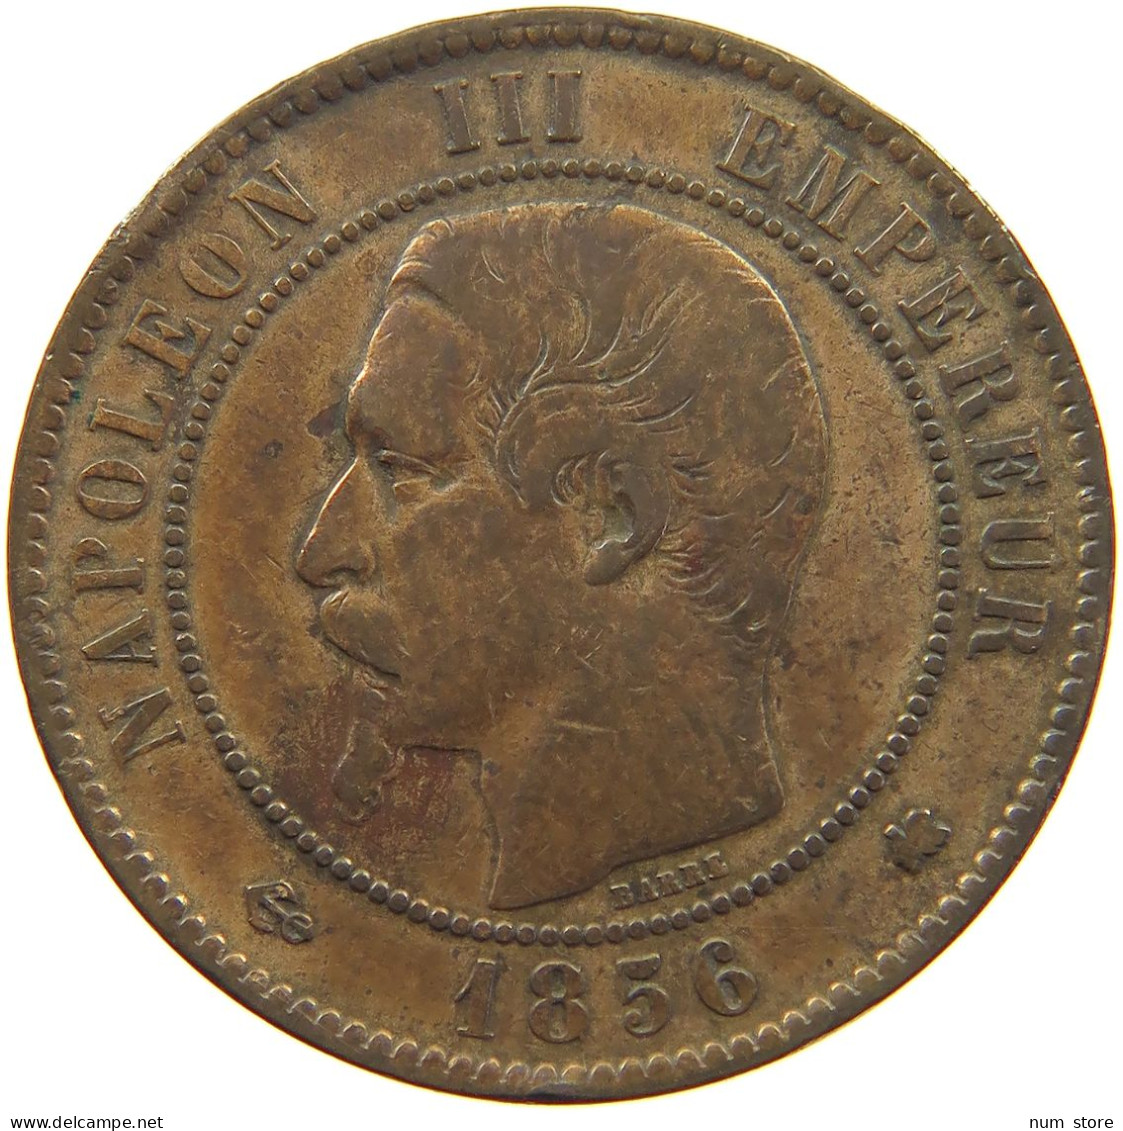 FRANCE 10 CENTIMES 1856 K Napoleon III. (1852-1870) #a059 0361 - 10 Centimes